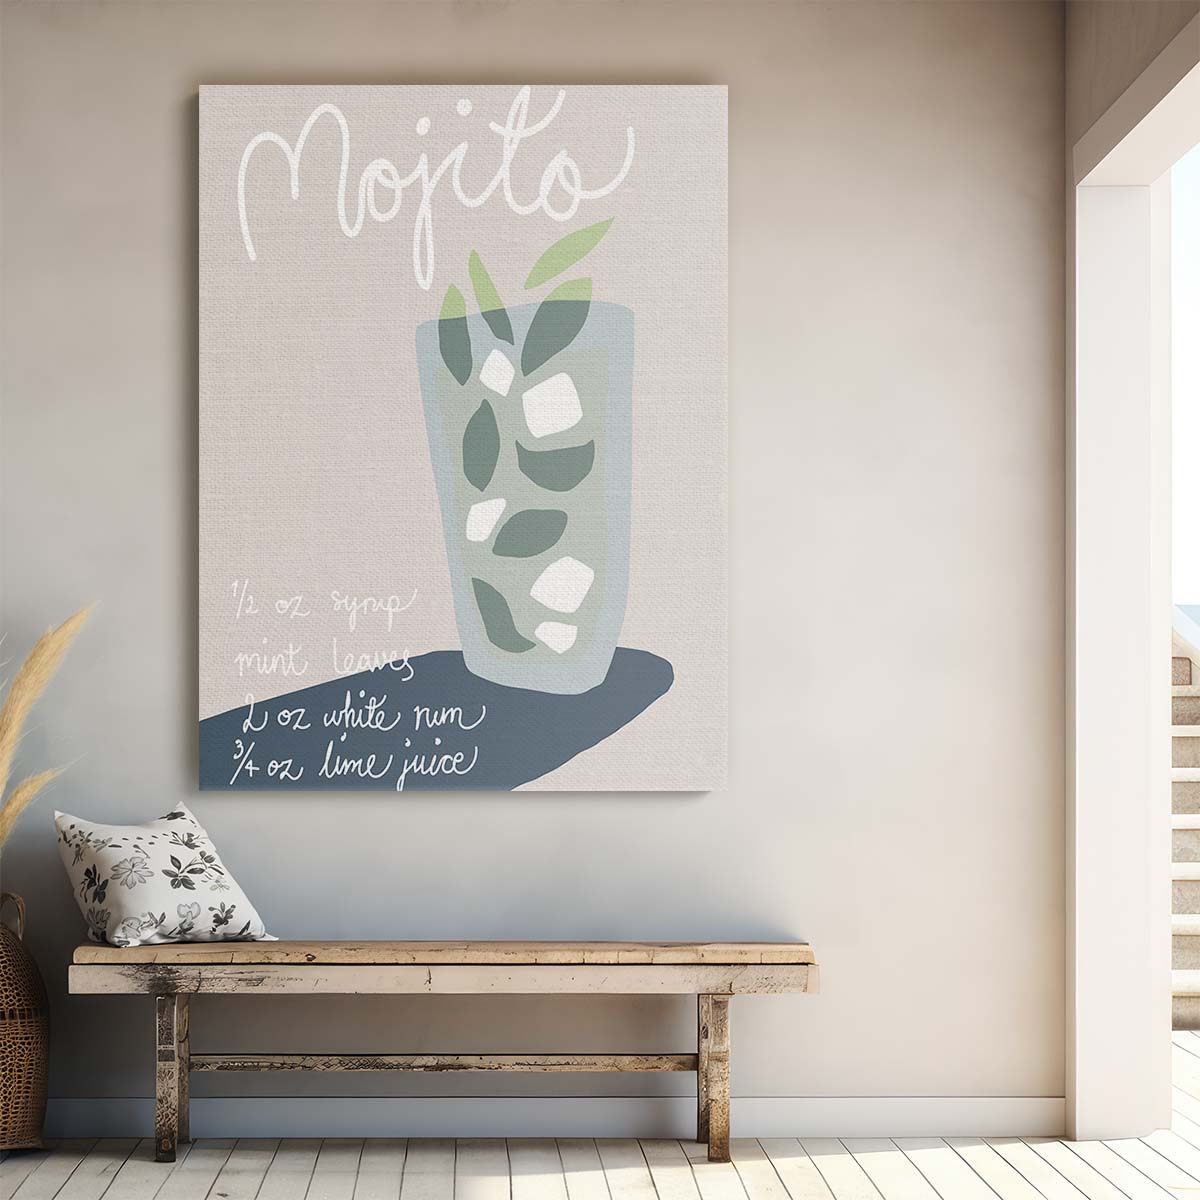 Creative Mojito Cocktail Recipe Kitchen Bar Illustration Wall Art by Luxuriance Designs, made in USA